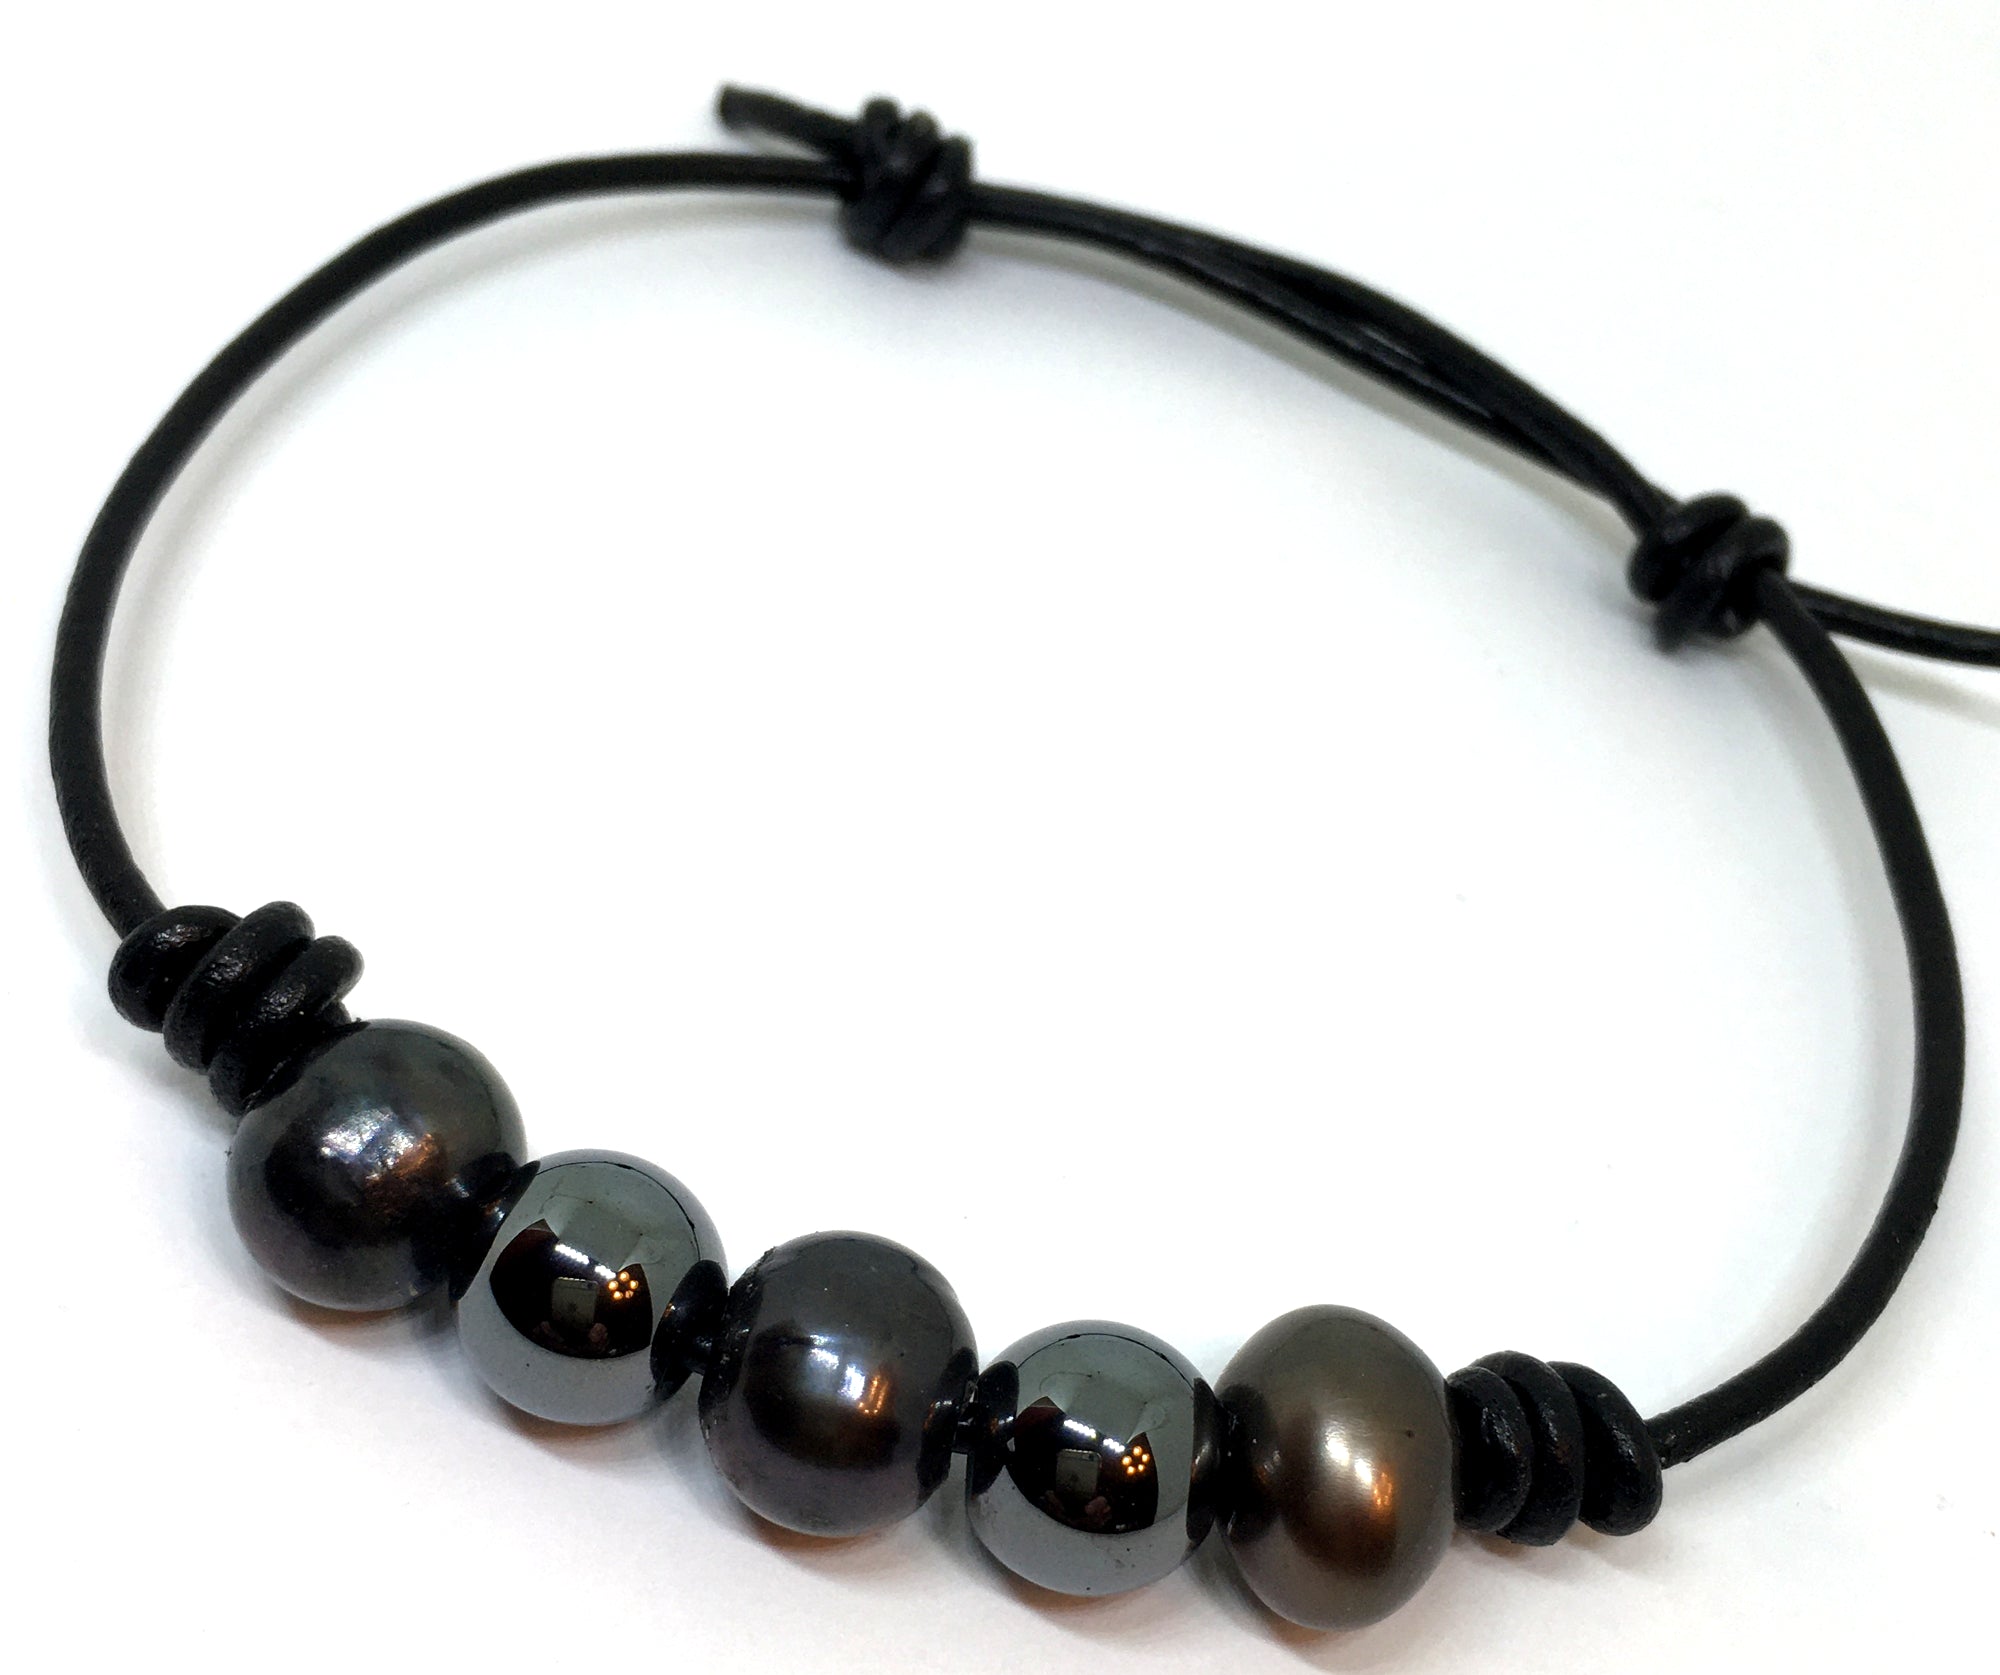 Black Peacock Pearl and Hematite Knotted Leather Bracelet for Men and Women